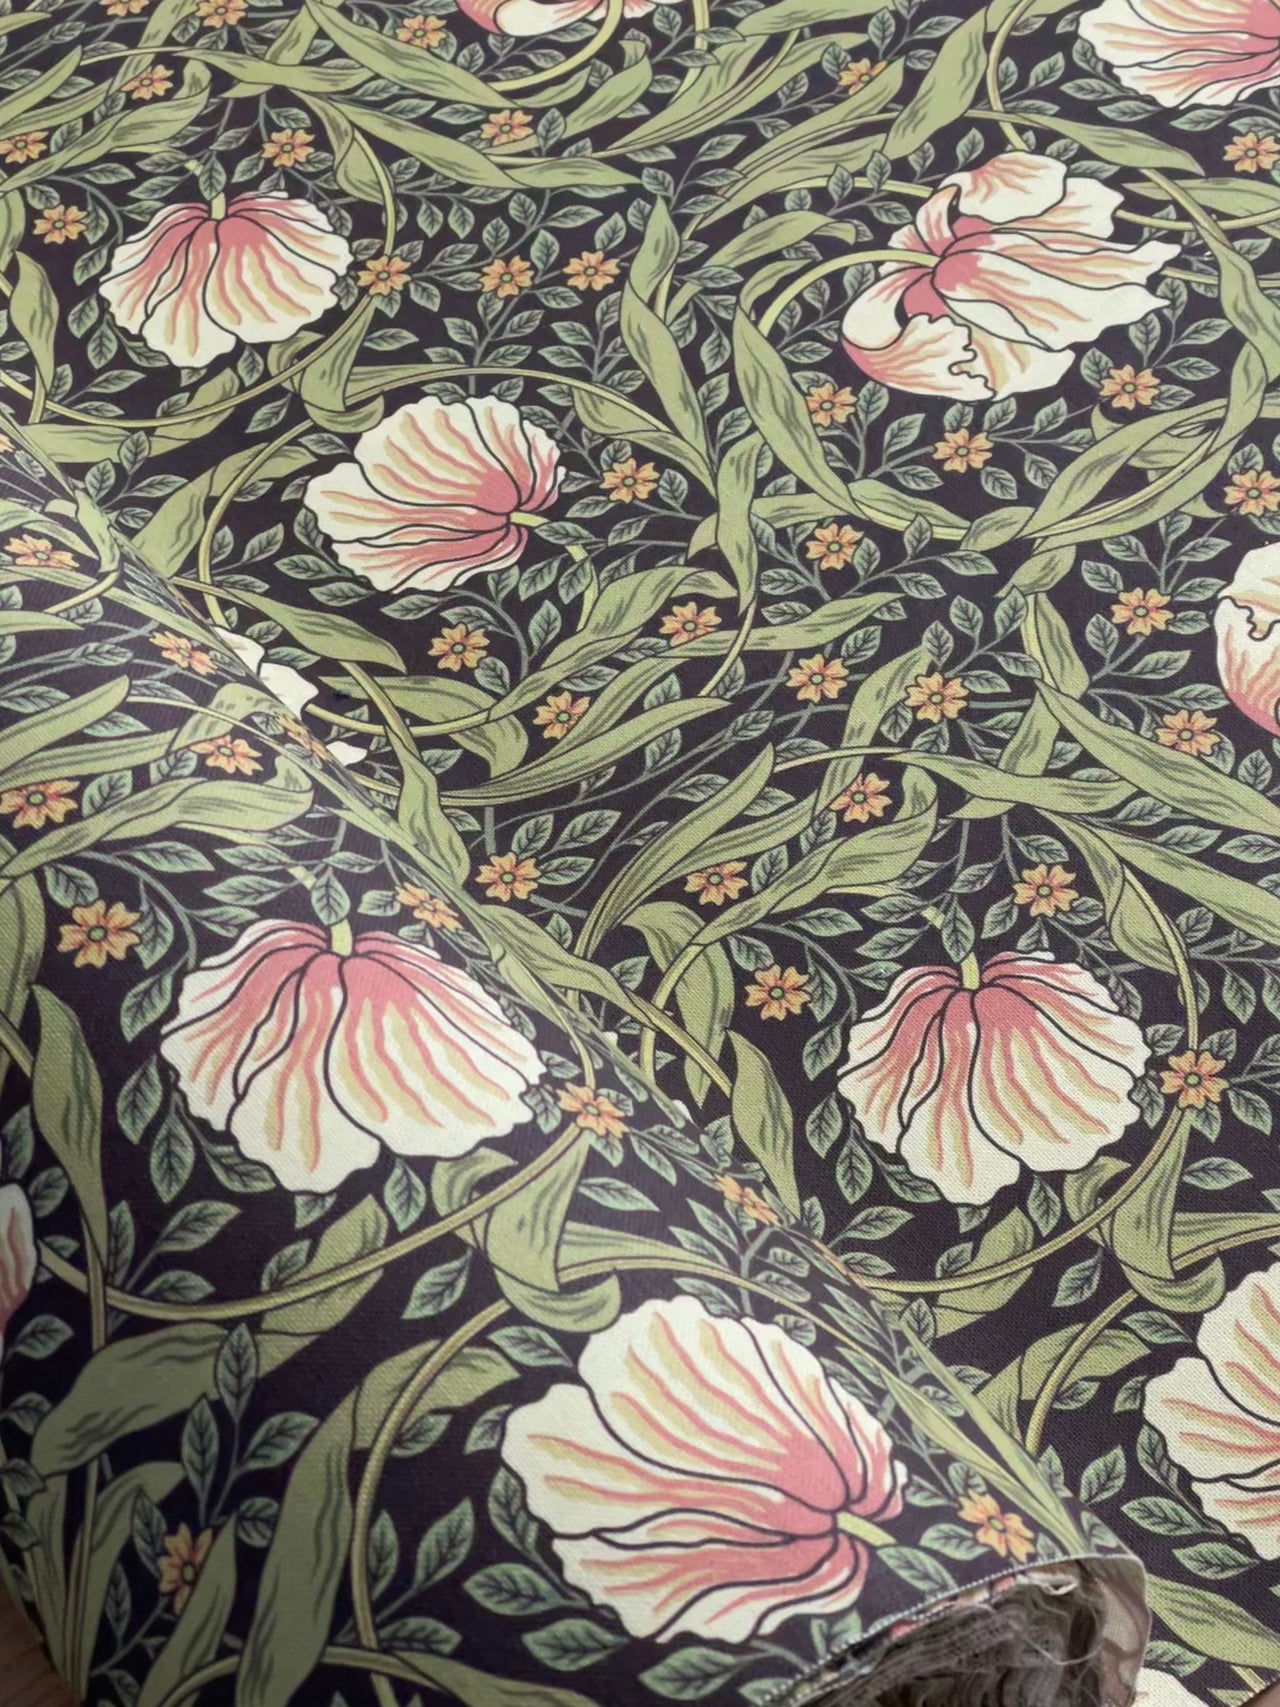 Vintage Style William Morris Fabric - Pimpernel Pattern with Tulips - Cotton Print, Sold by the Meter